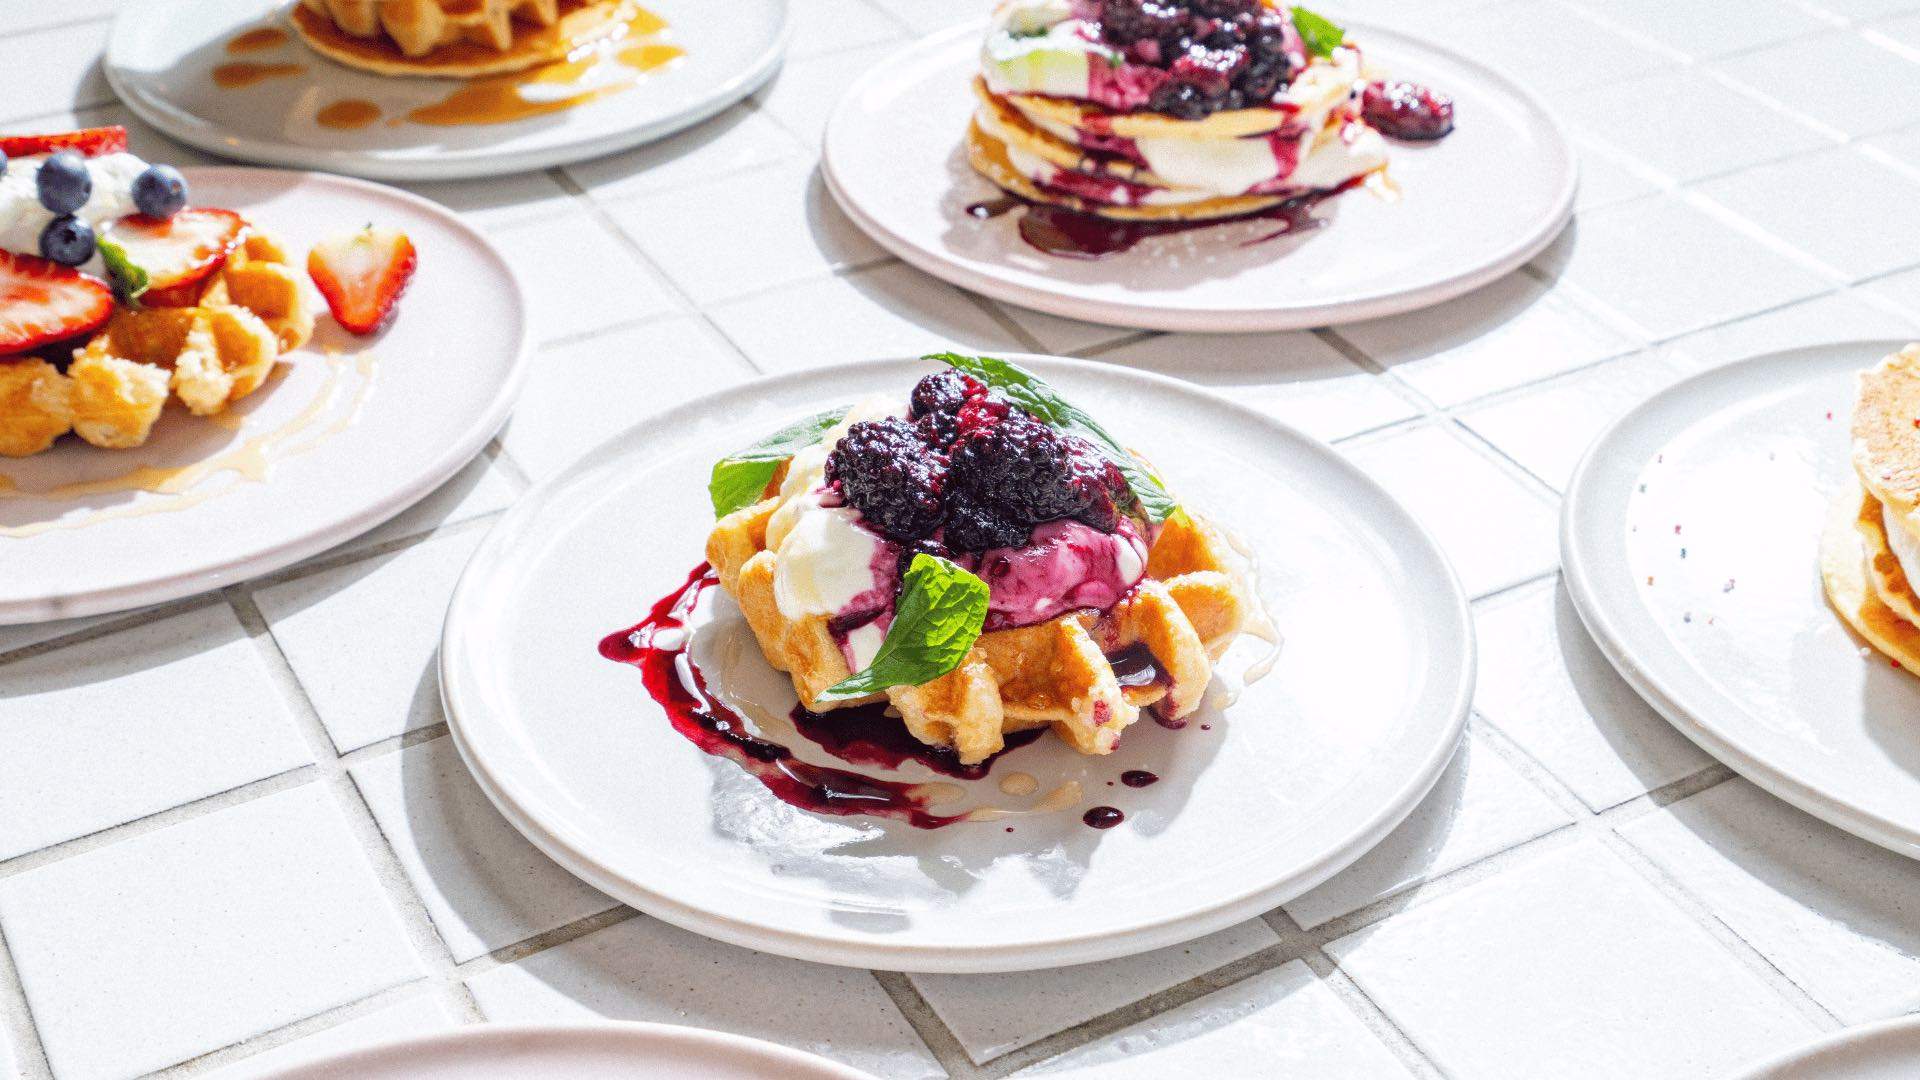 A waffle with whipped cream and berries surrounded by other pancakes and waffles.